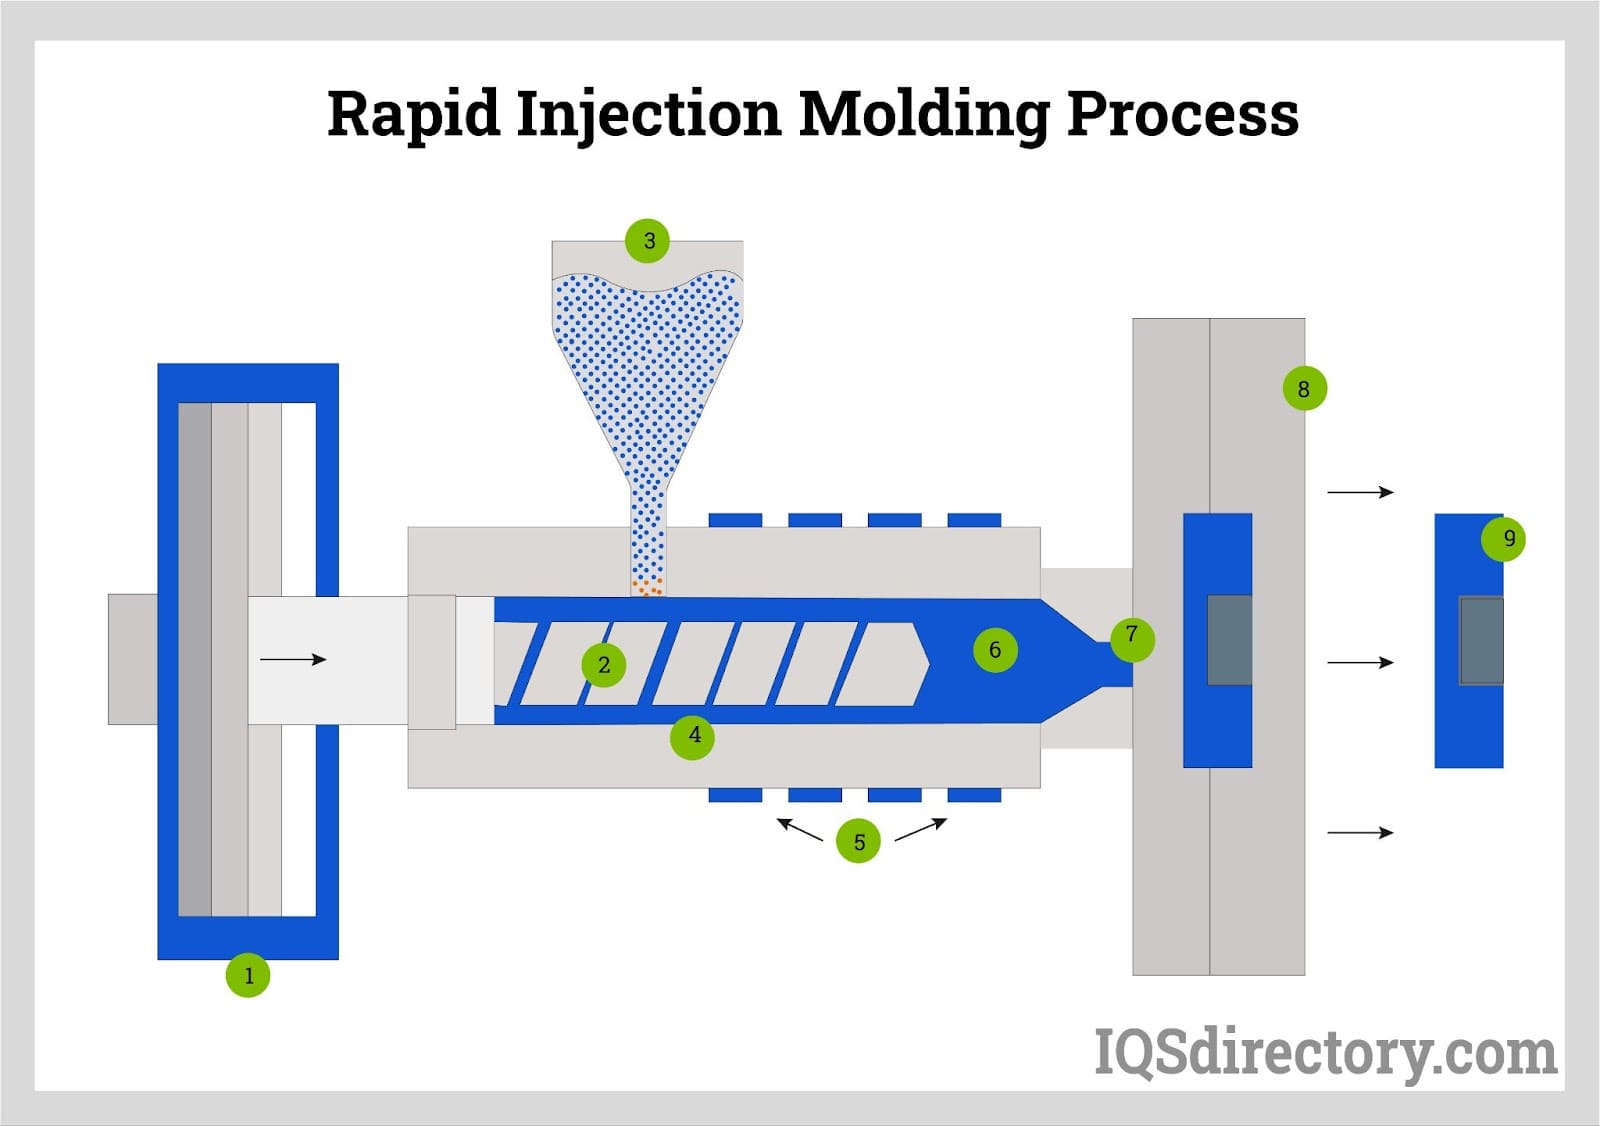 Rapid Injection Molding Process